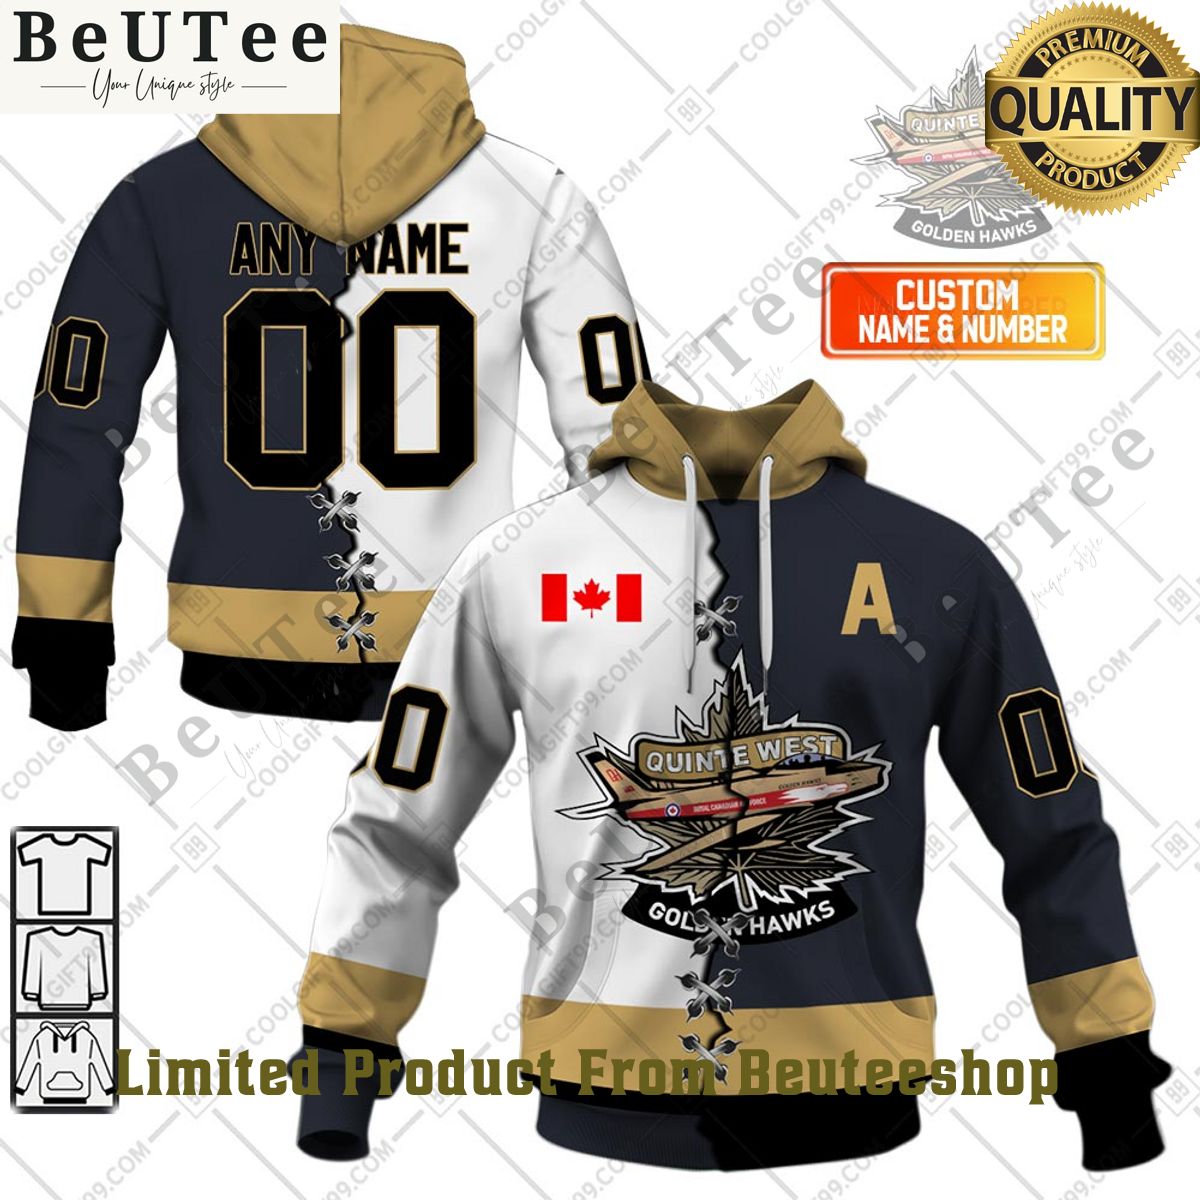 canada hockey personalized trenton golden hawks mix captain style a printed hoodie 1 JaHKw.jpg